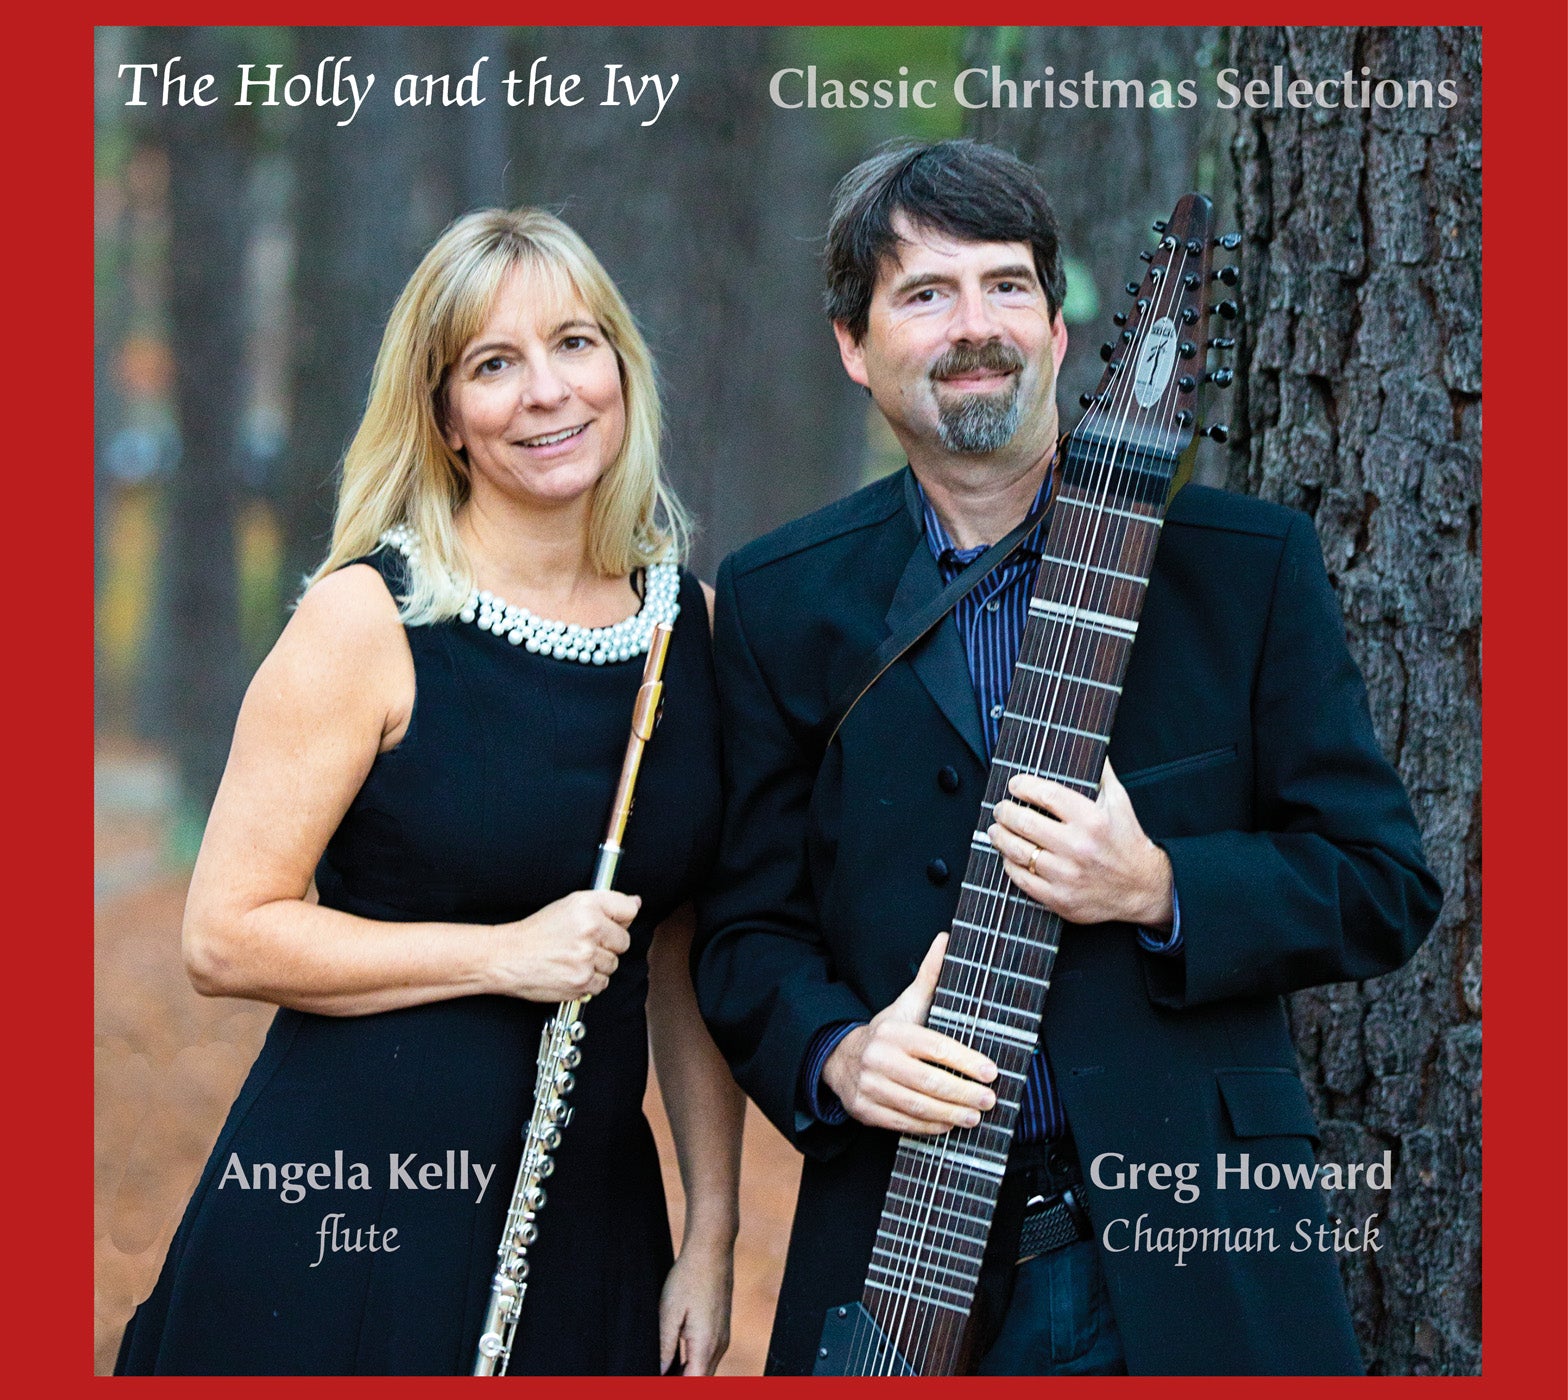 "The Holly and the Ivy" - Classic Christmas Selections